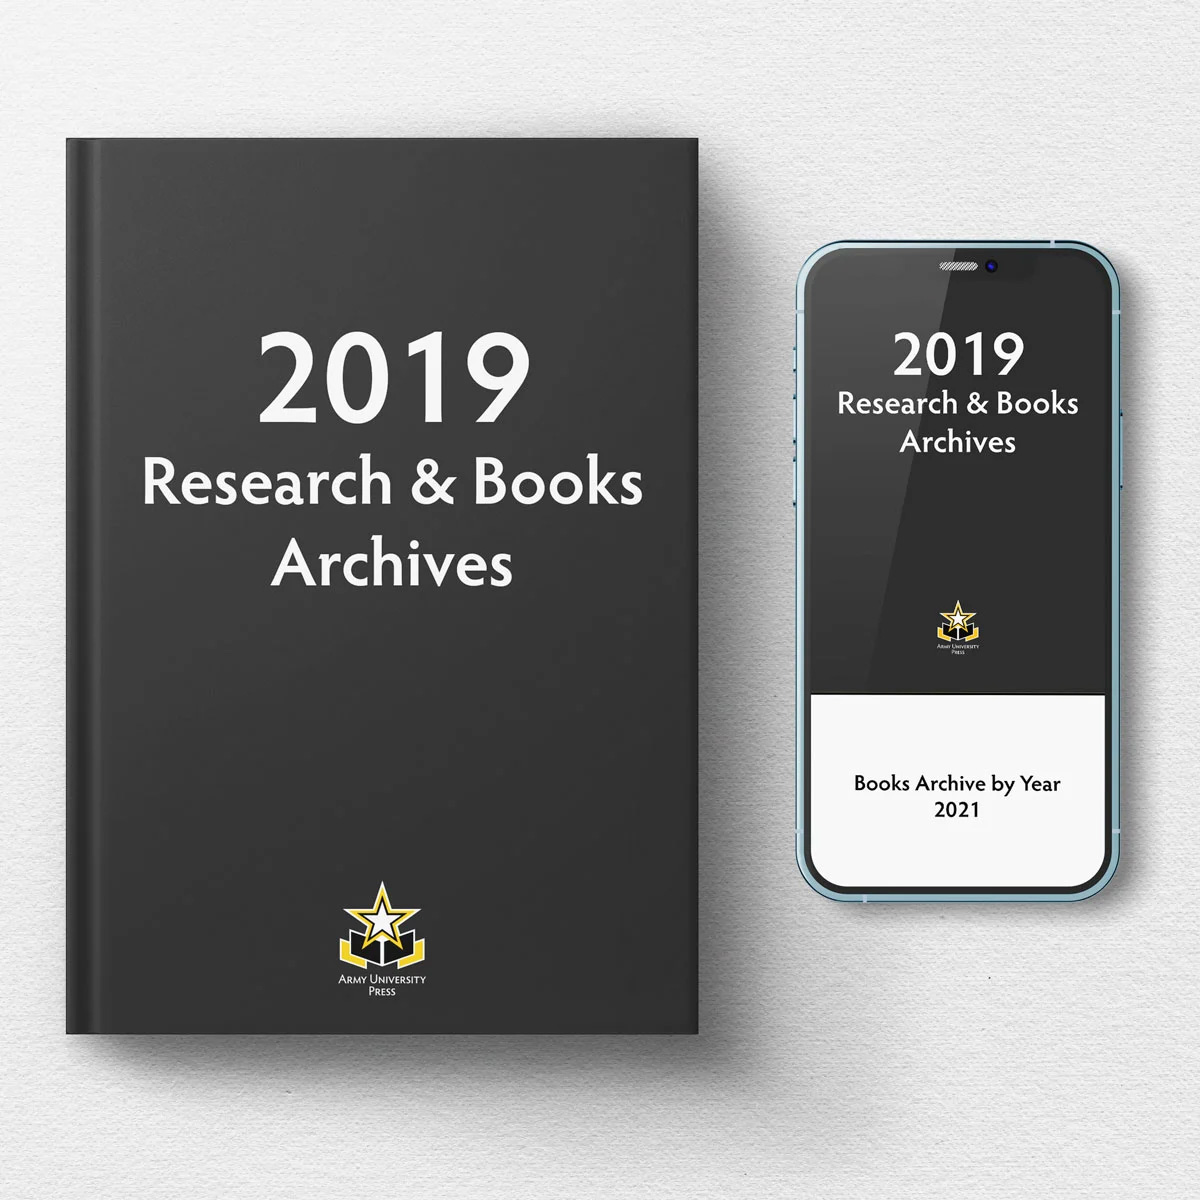 2019 Archives